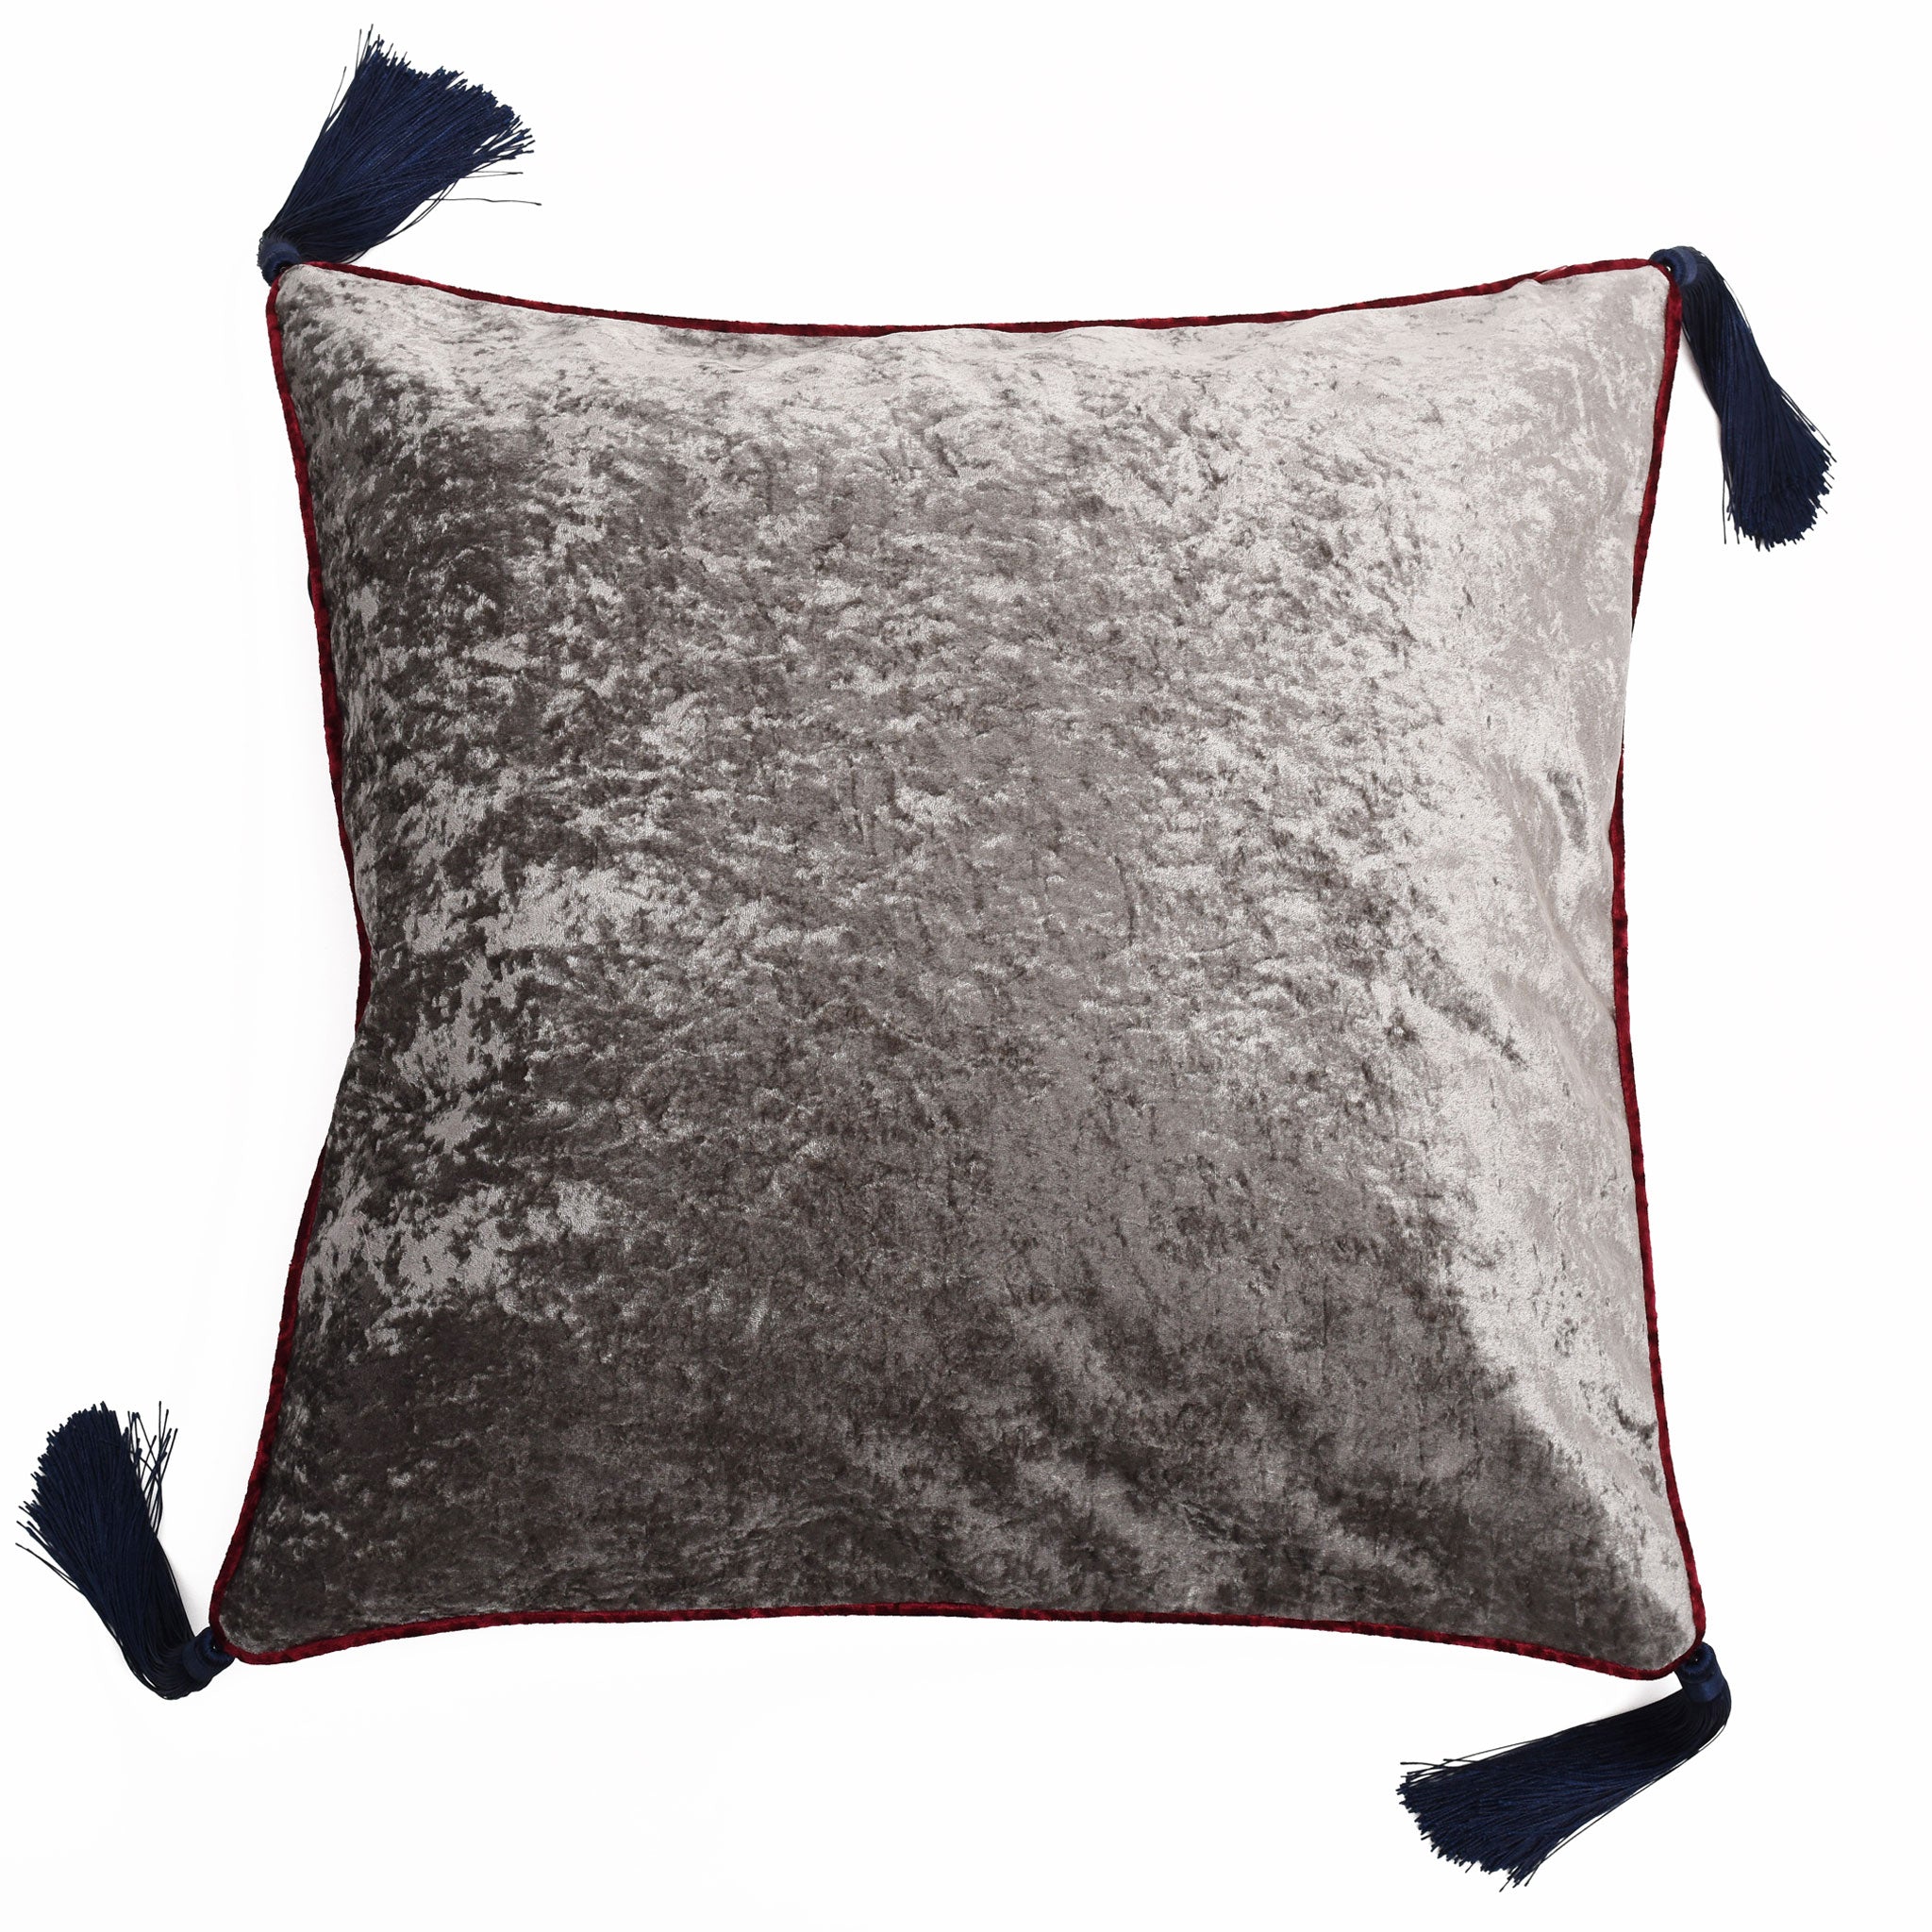 Bivain---C0104-front_-_Silver_and_red_velvet_double-sided_cushion_with_navy_tassels.jpg